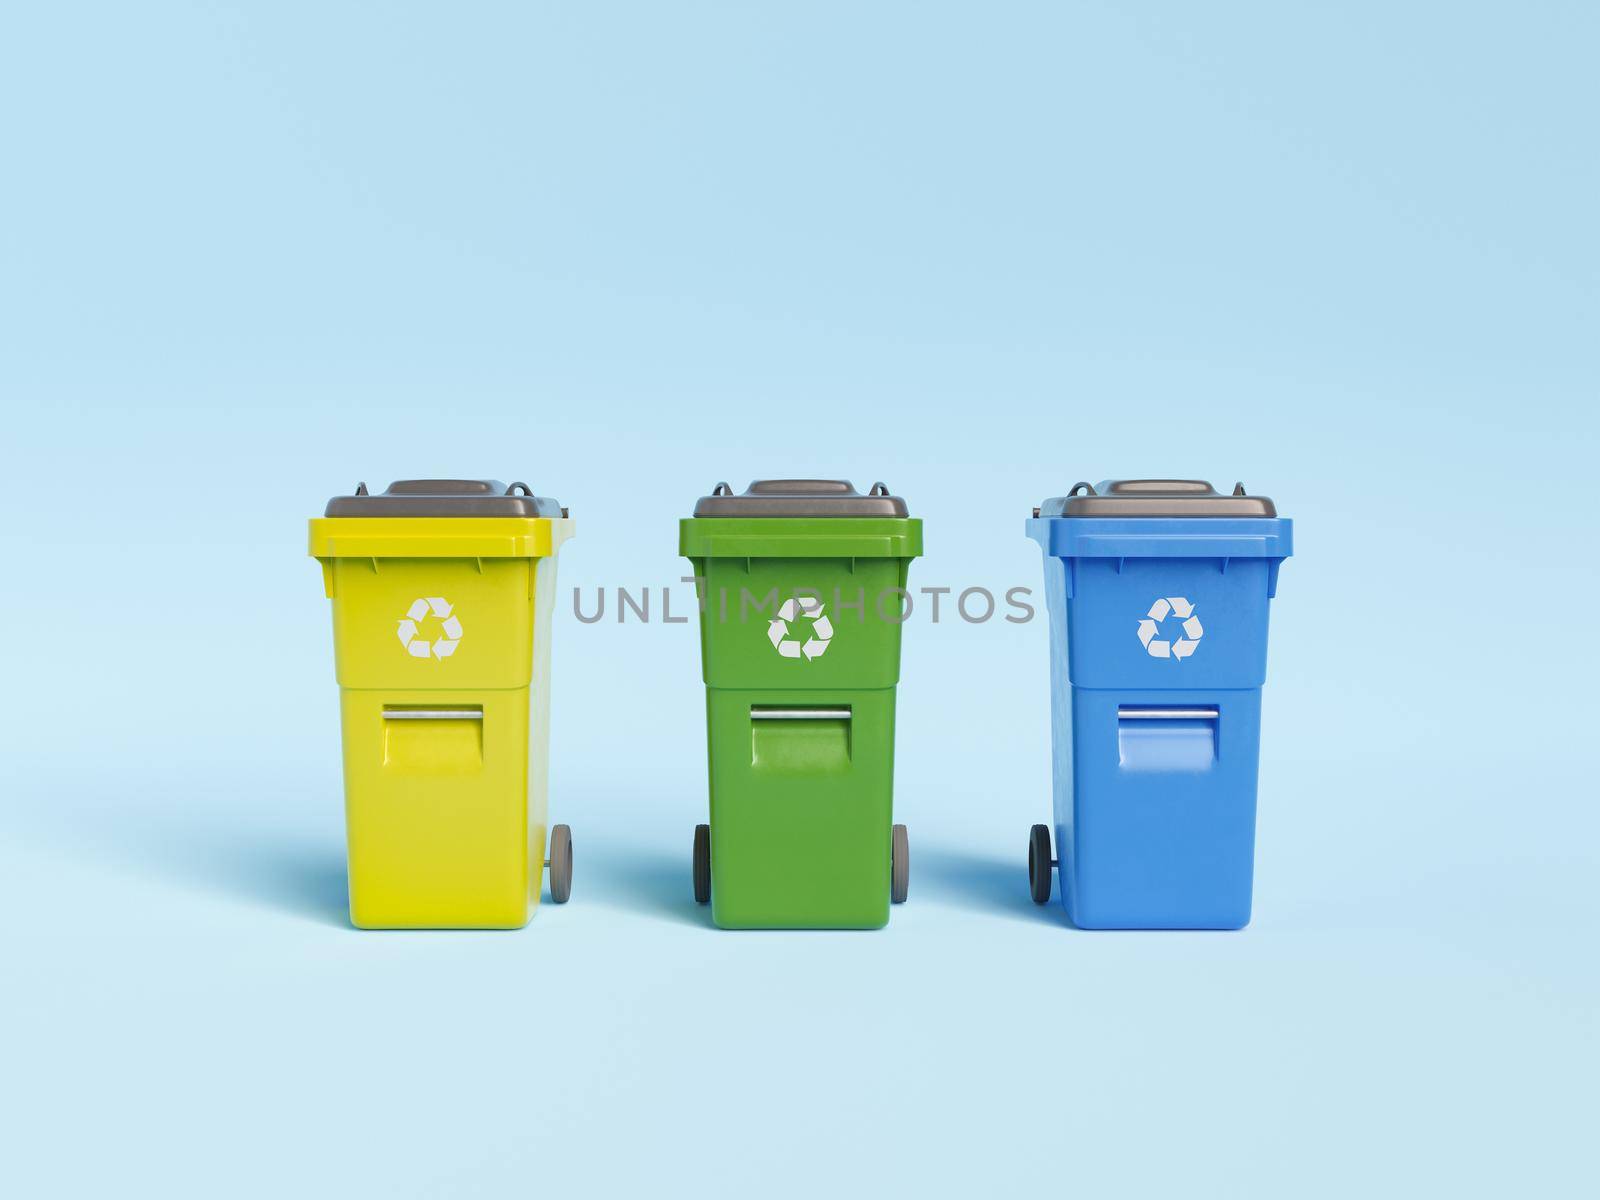 Bins for various recyclable garbage by asolano